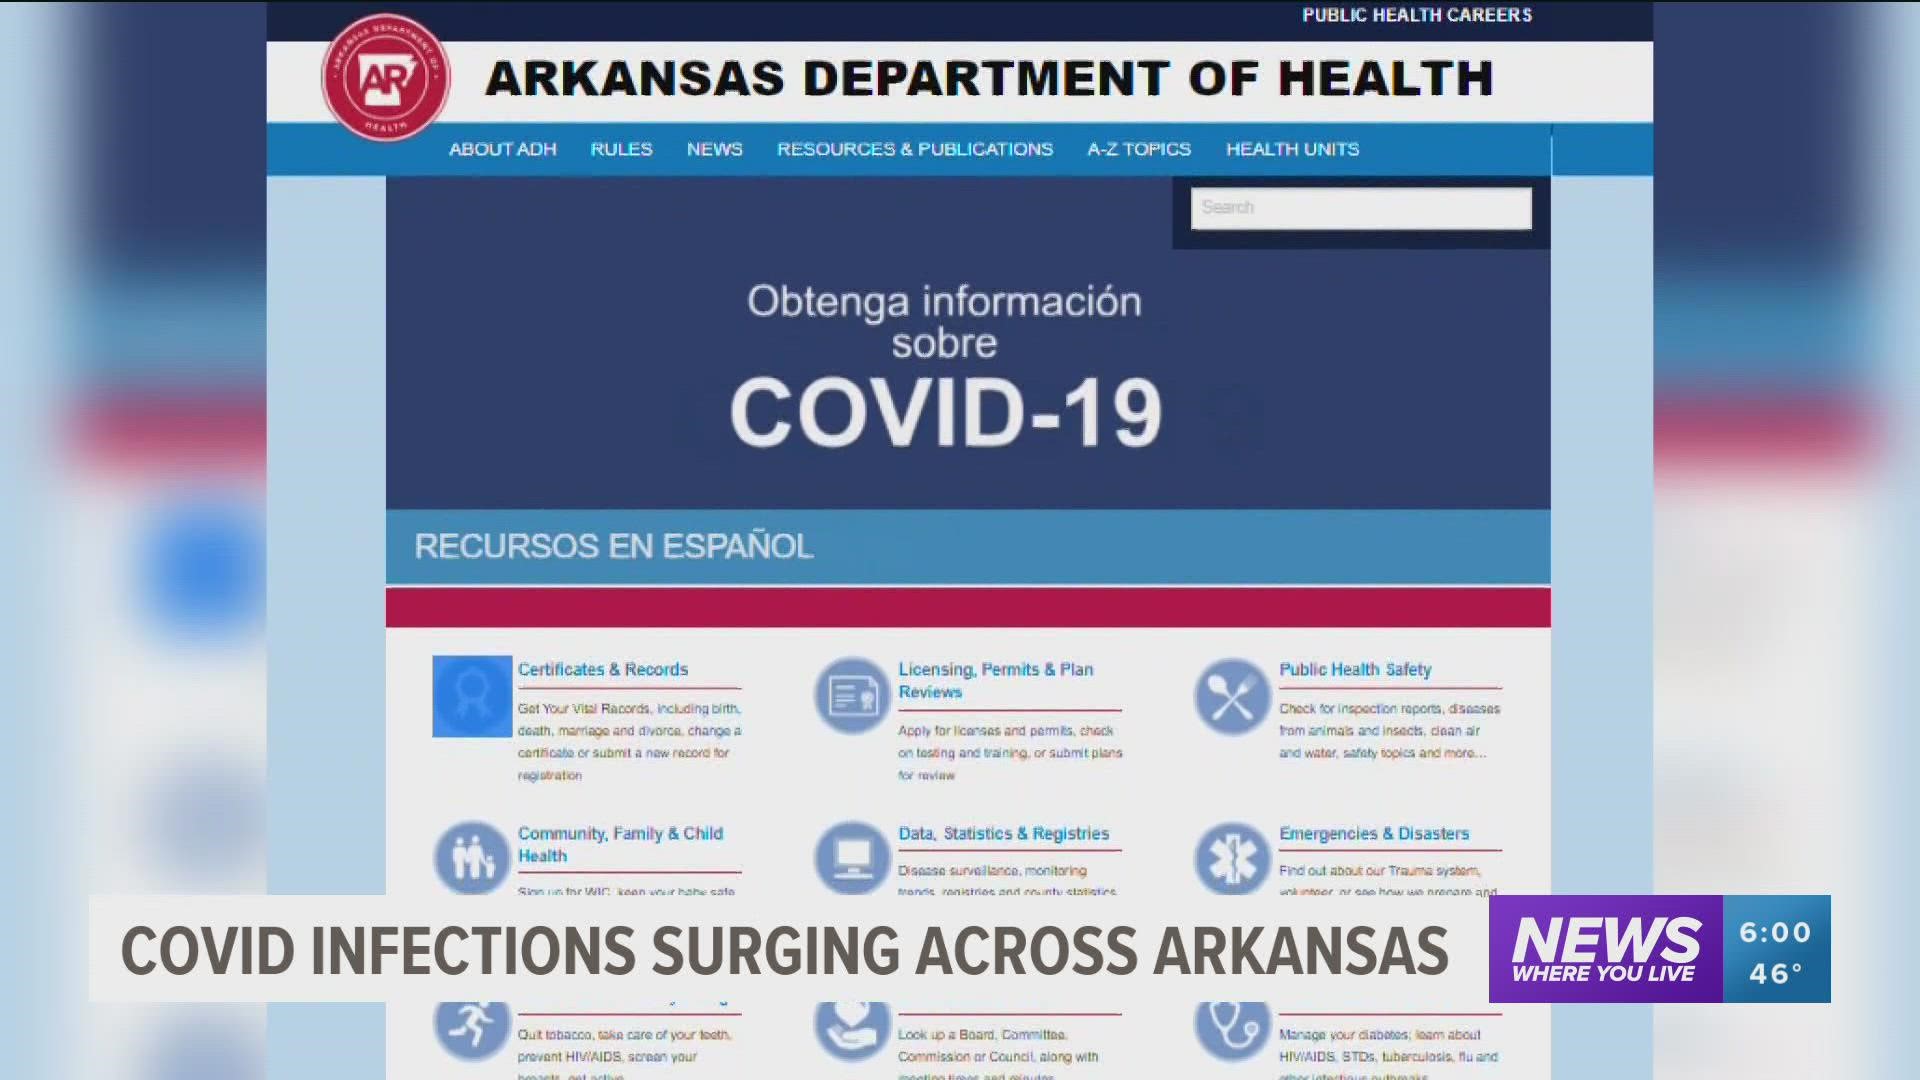 97% of Arkansas school district communities are seeing spikes in COVID-19 cases. The ACHI is calling for immediate short-term actions to combat the virus spread.